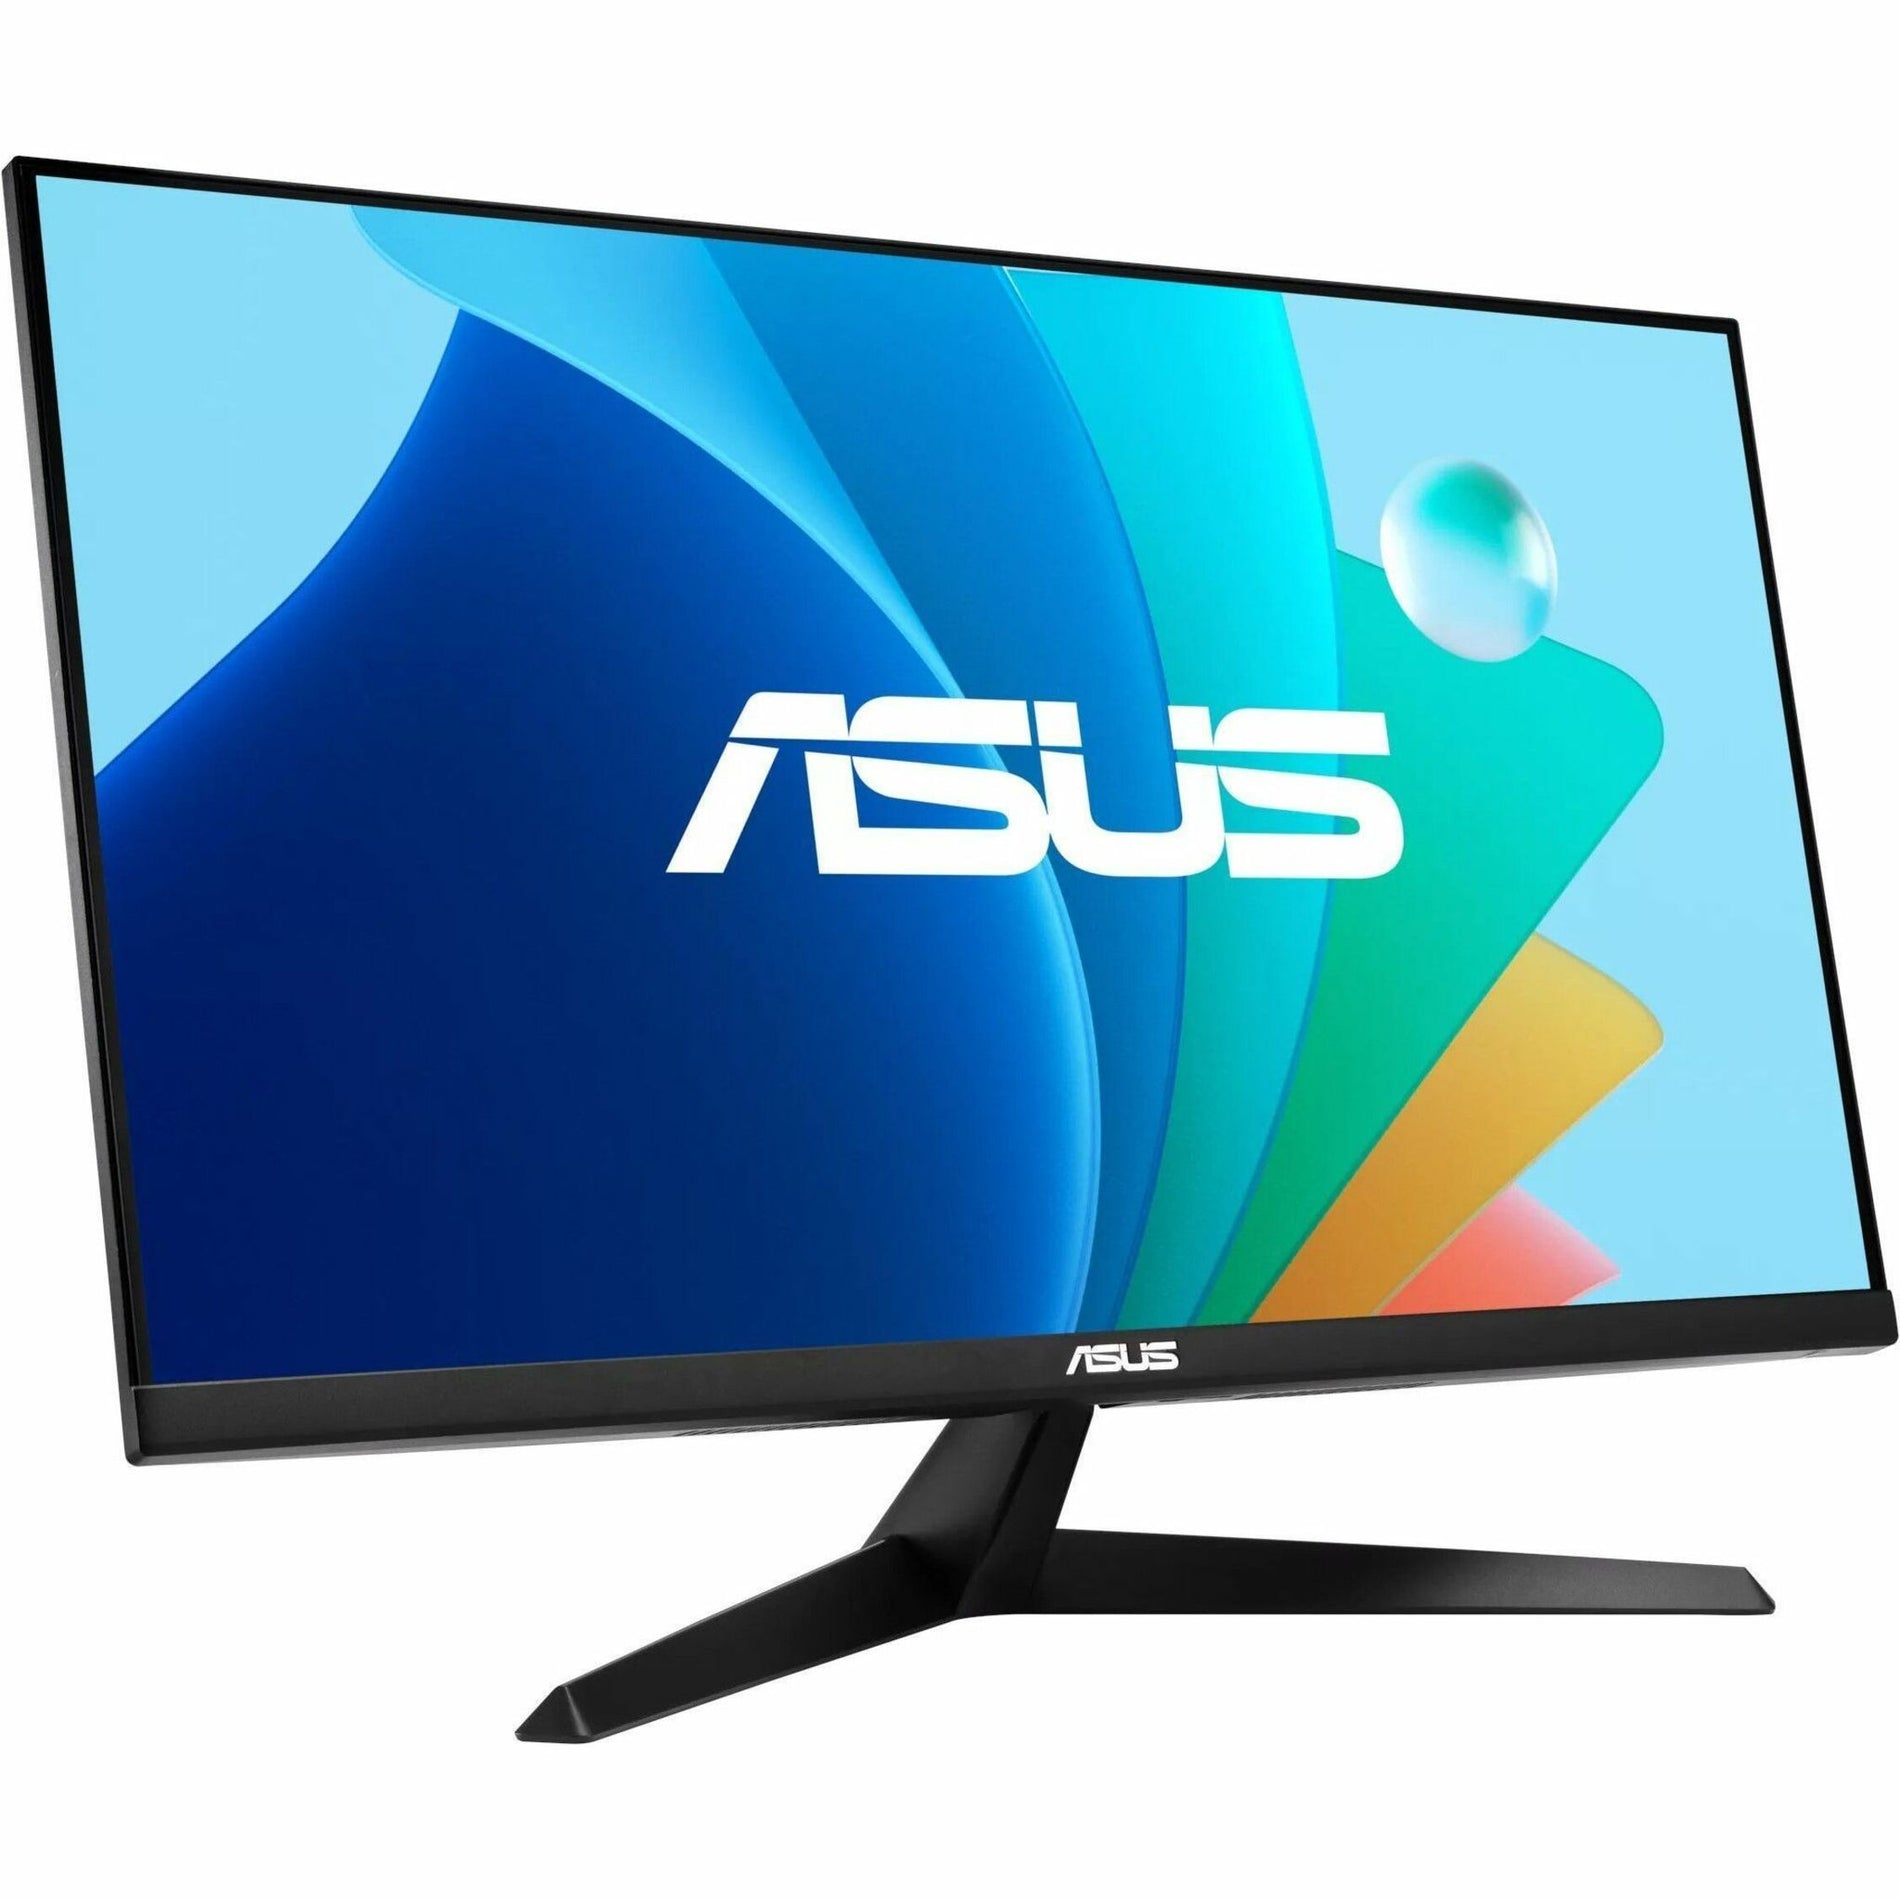 Asus VY279HF Gaming LED Monitor 27", Full HD, Adaptive Sync, TCO Certified, EPEAT Bronze